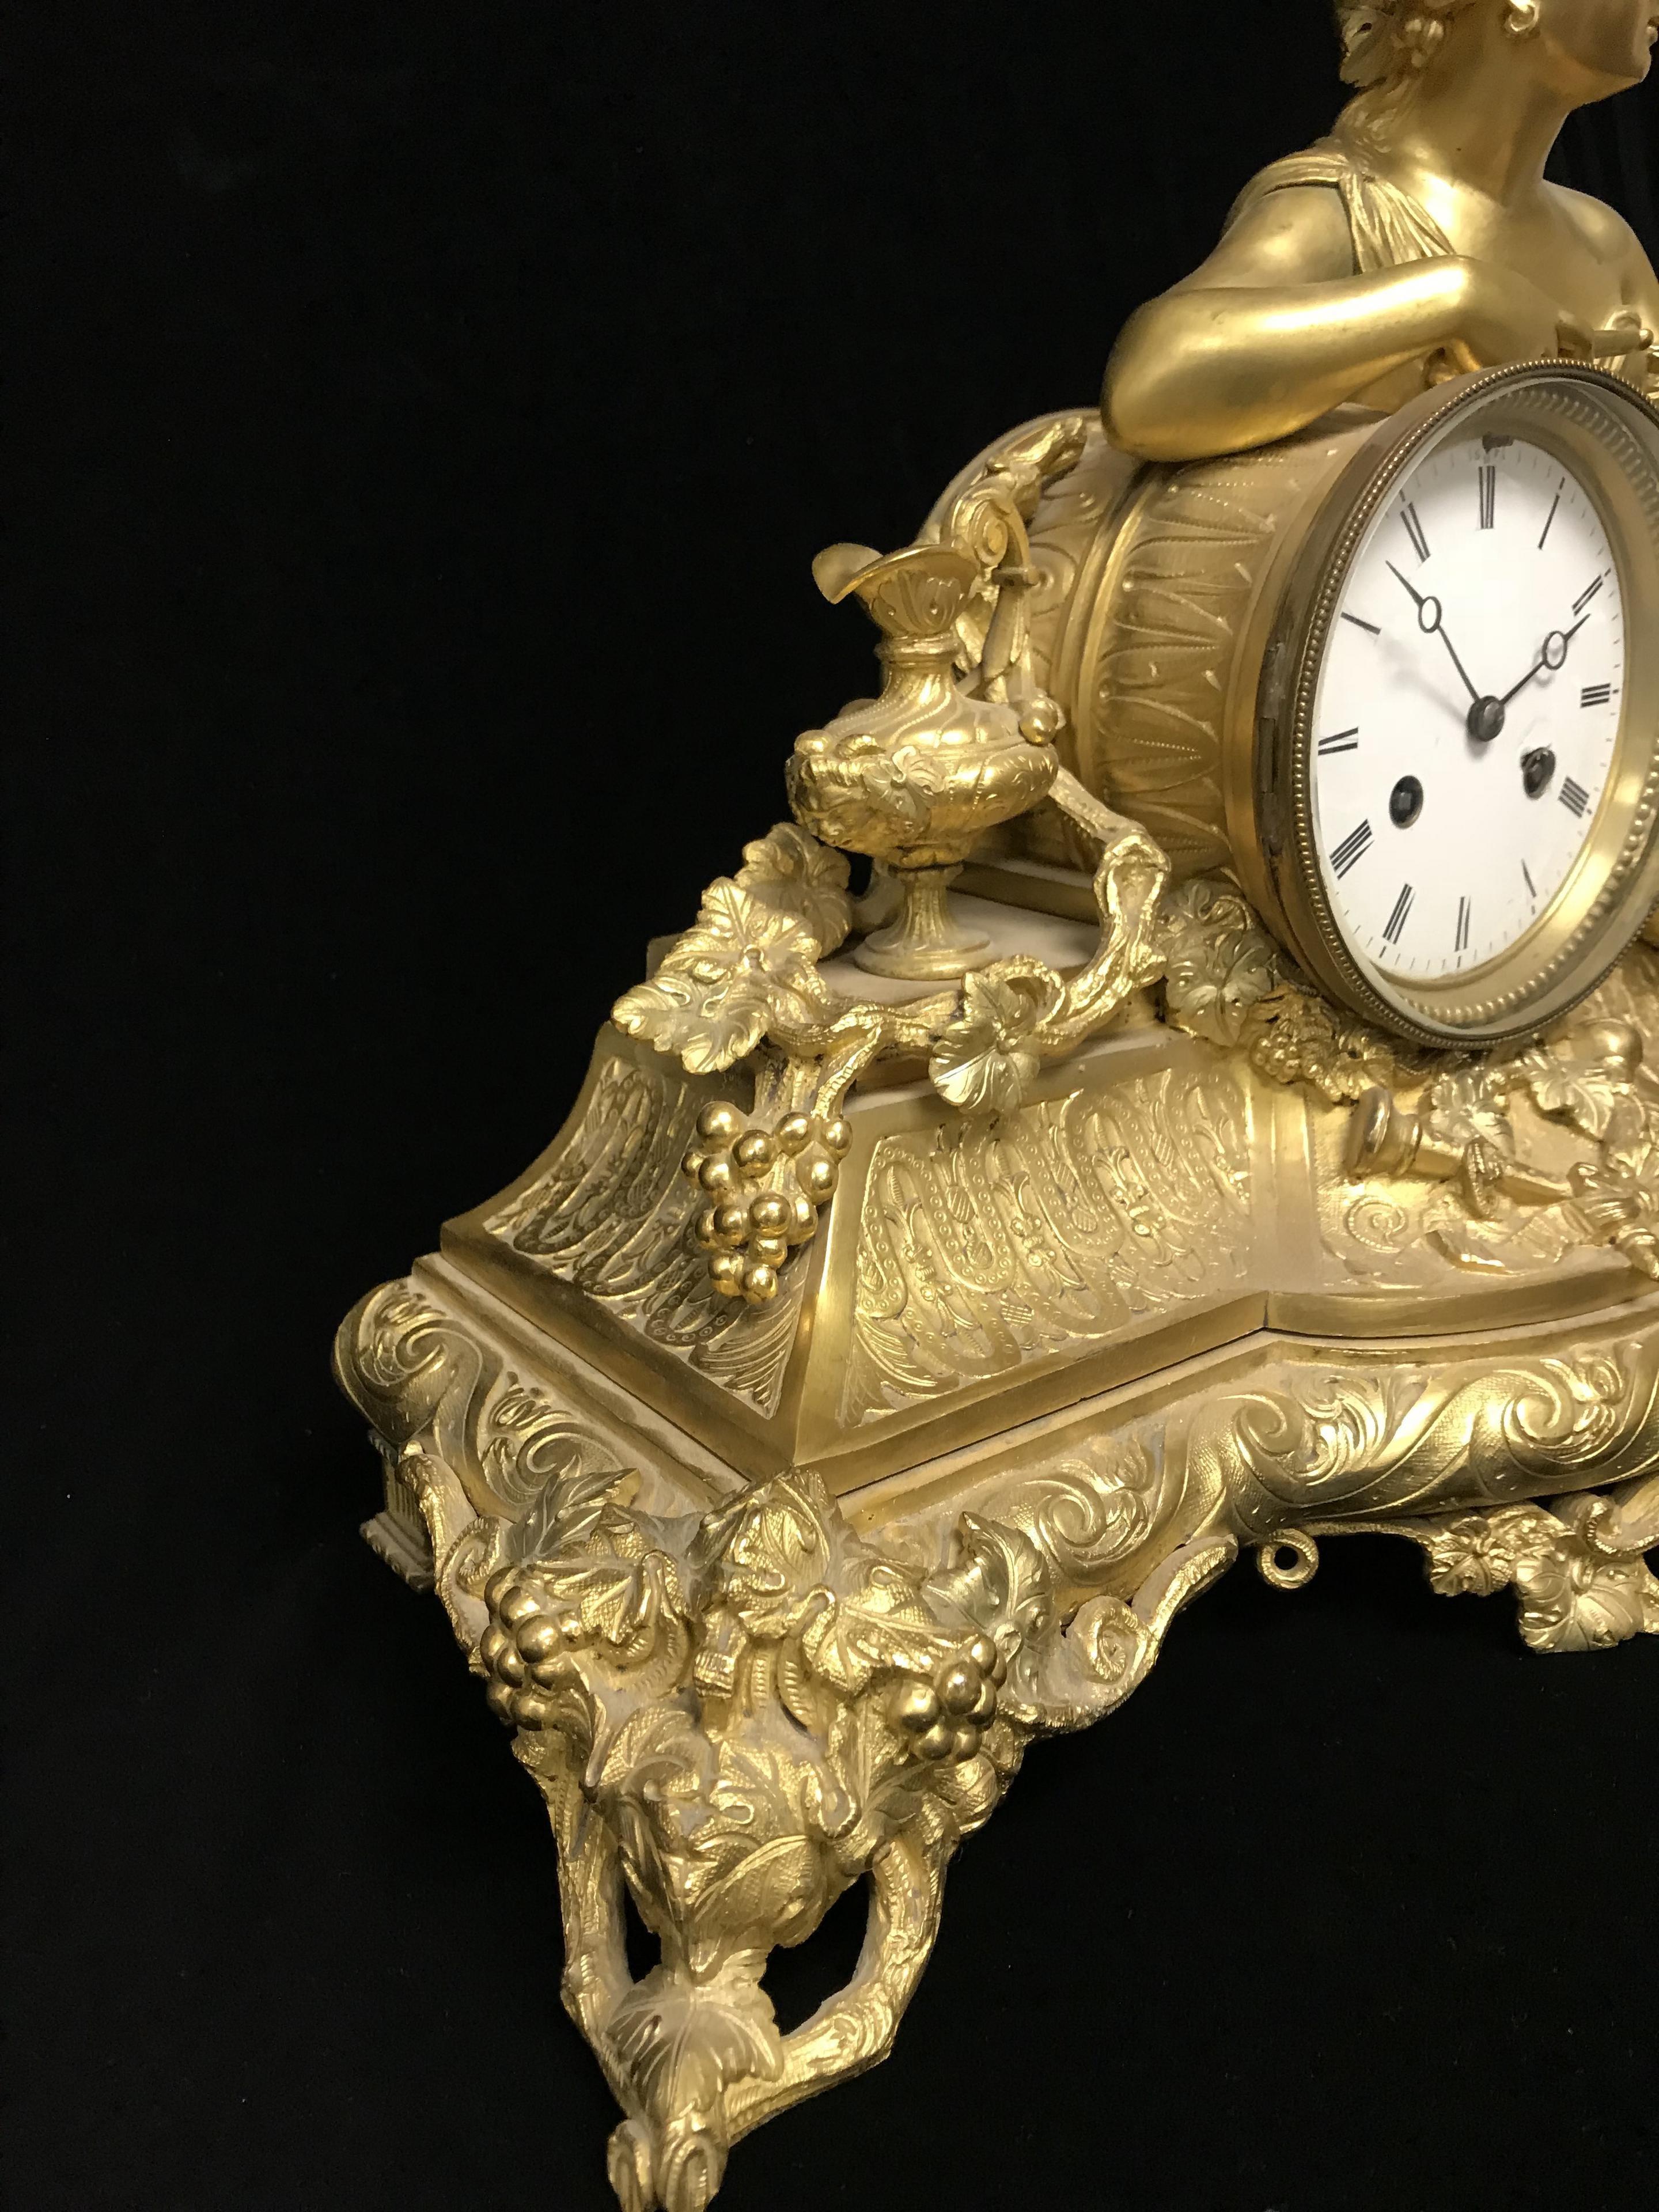 Antique Gilt Bronze French Mantle Clock
A Large French Gilt Bronze with woman 